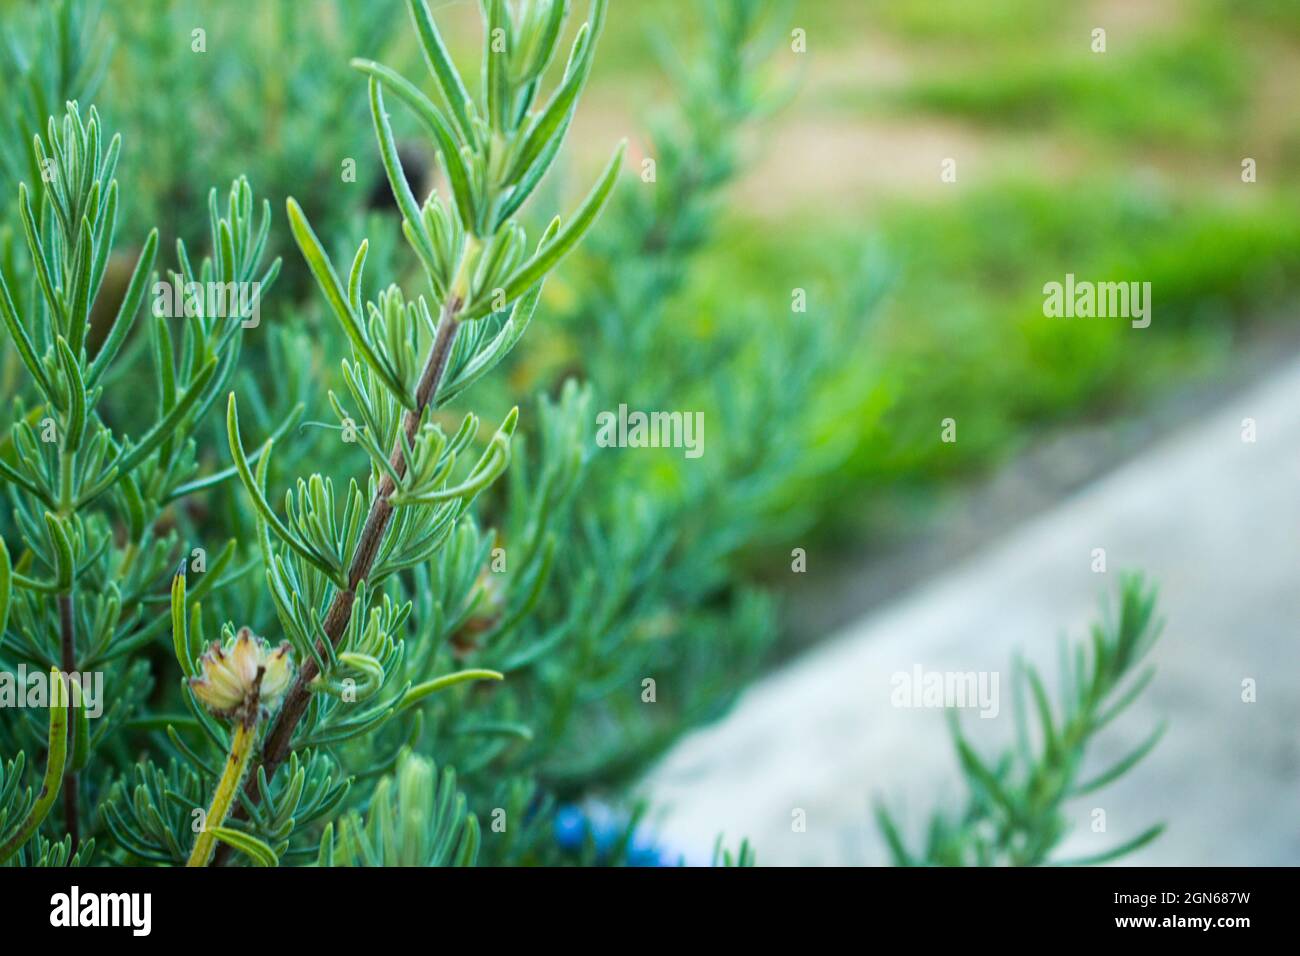 Green plant with leaves and high depth of field Stock Photo